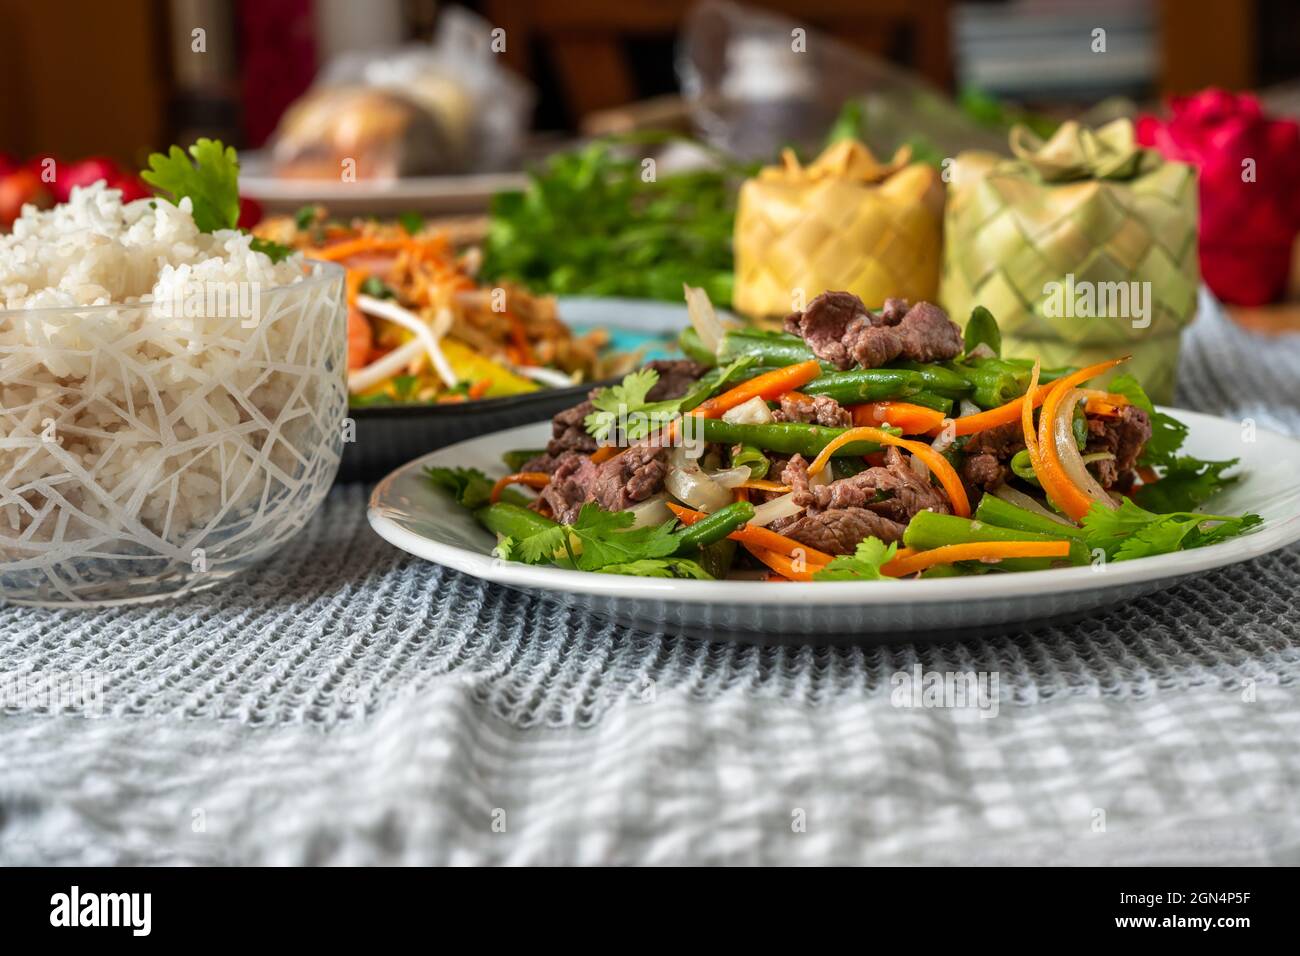 Vietnamese meal on plate, fried beef with green bean and carrot, rice in bowl, mango salad and bamboo box on table. Stock Photo